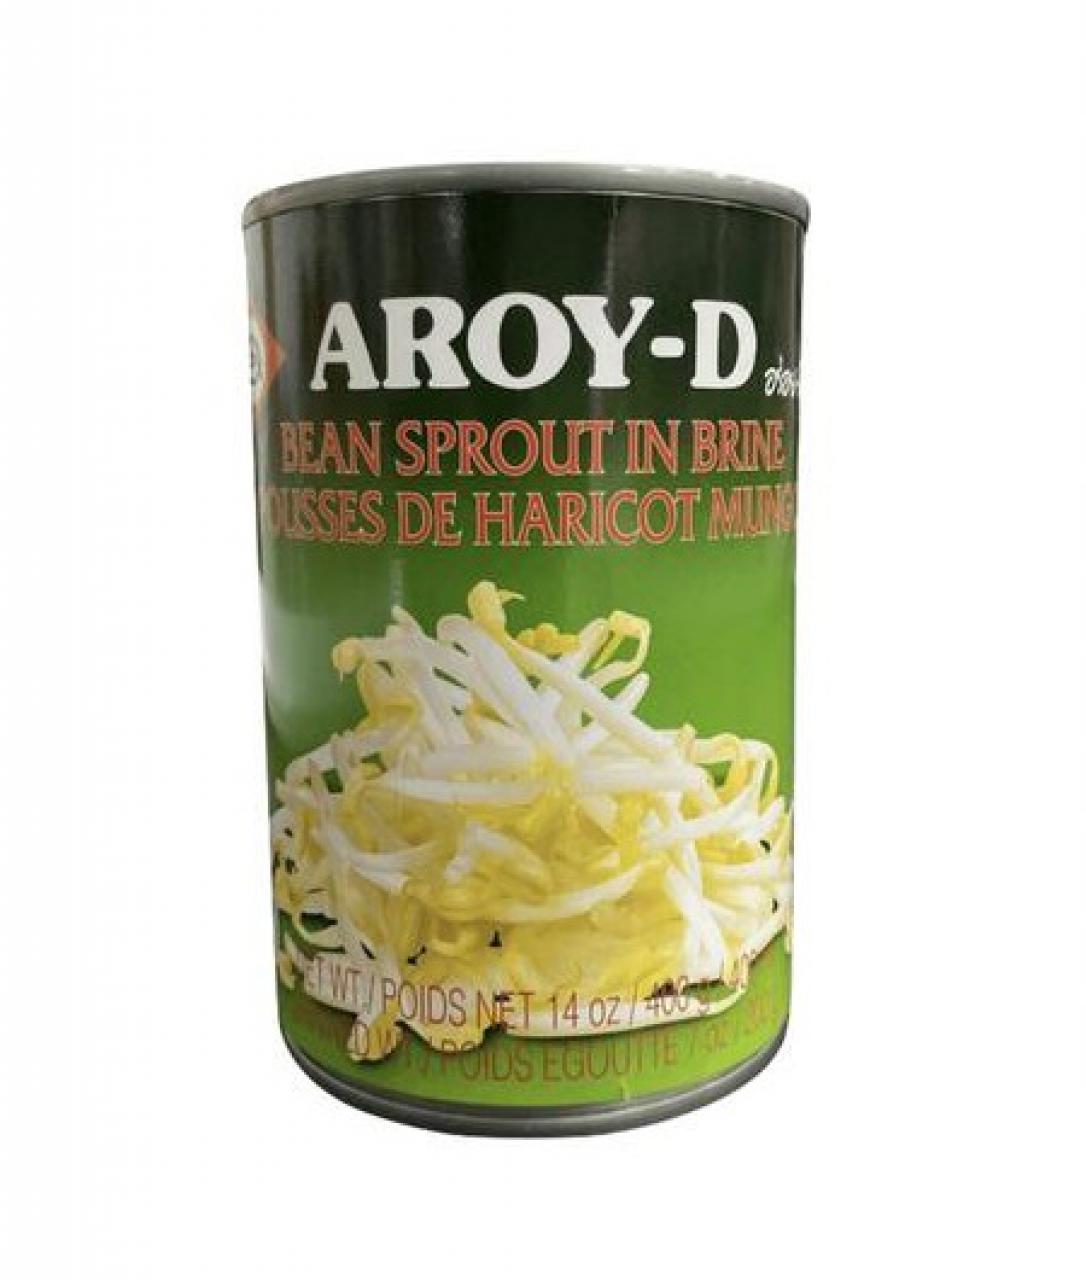 AROY-D BEAN SPROUT